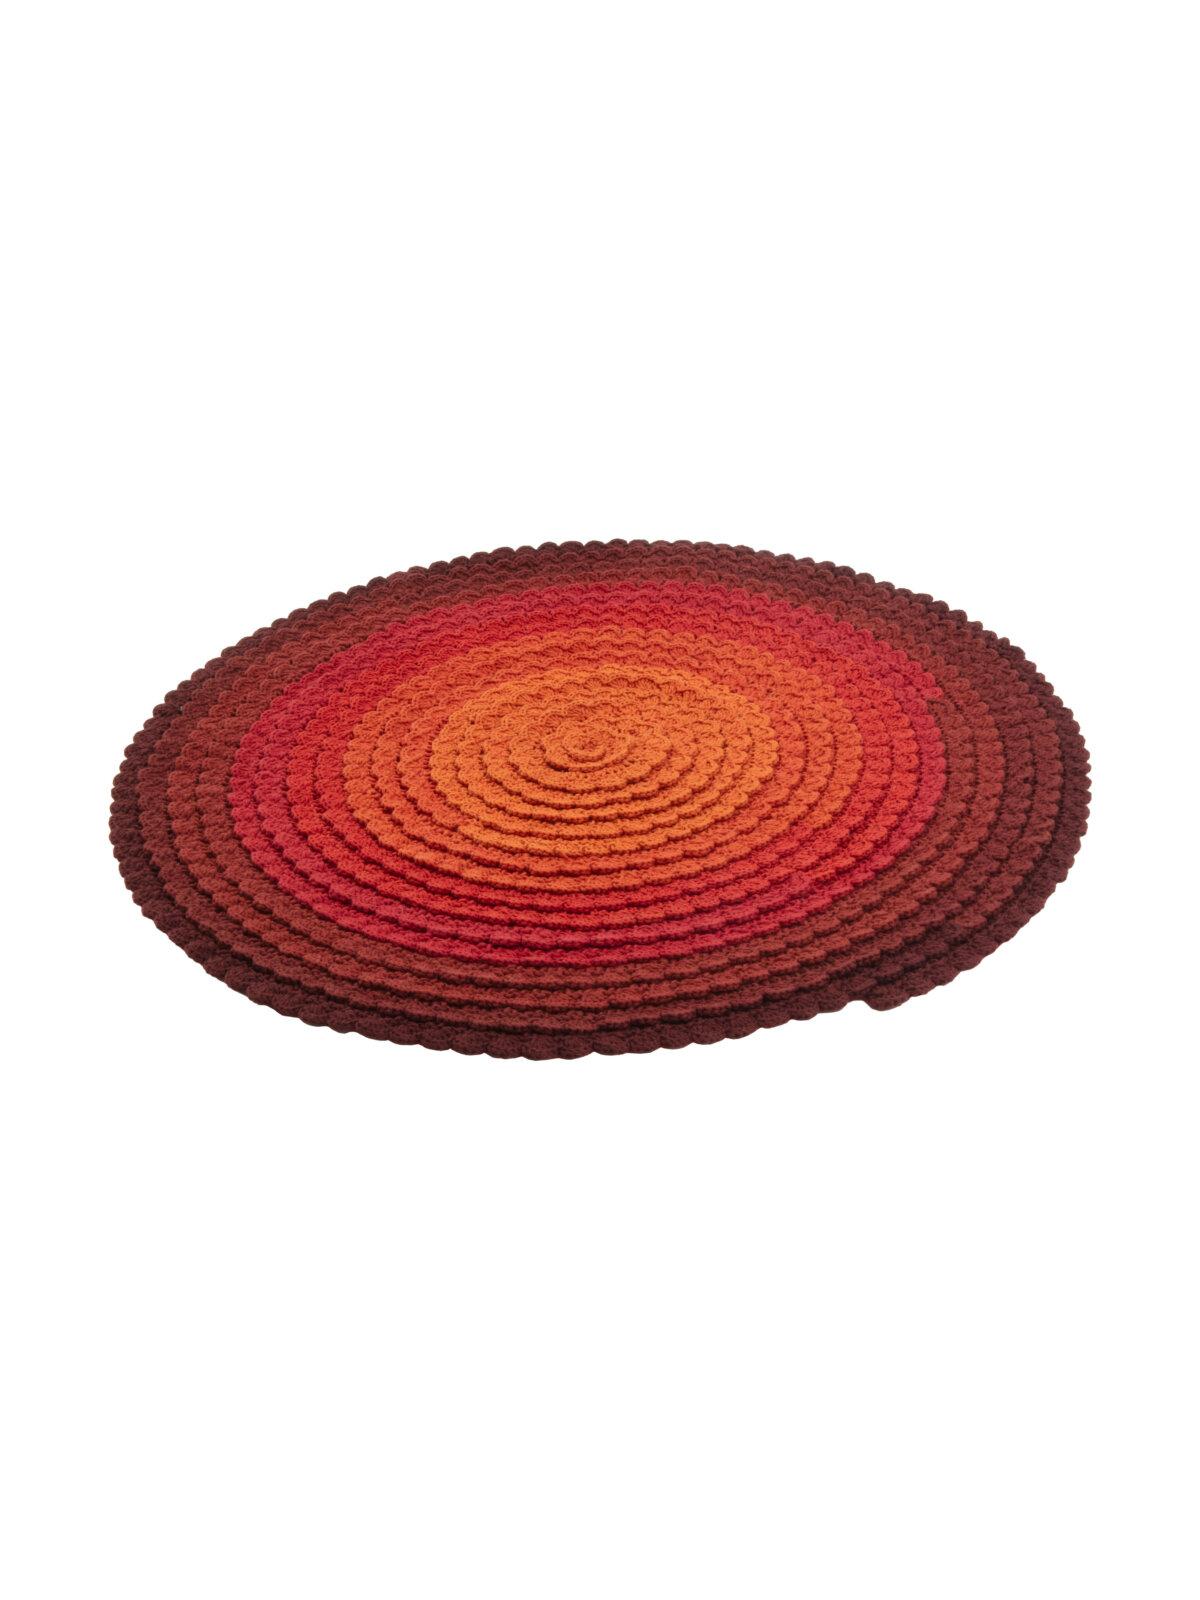 cc-tapis SWIRL AUTUMN handmade rug by Univers Uchronia In New Condition For Sale In Brooklyn, NY